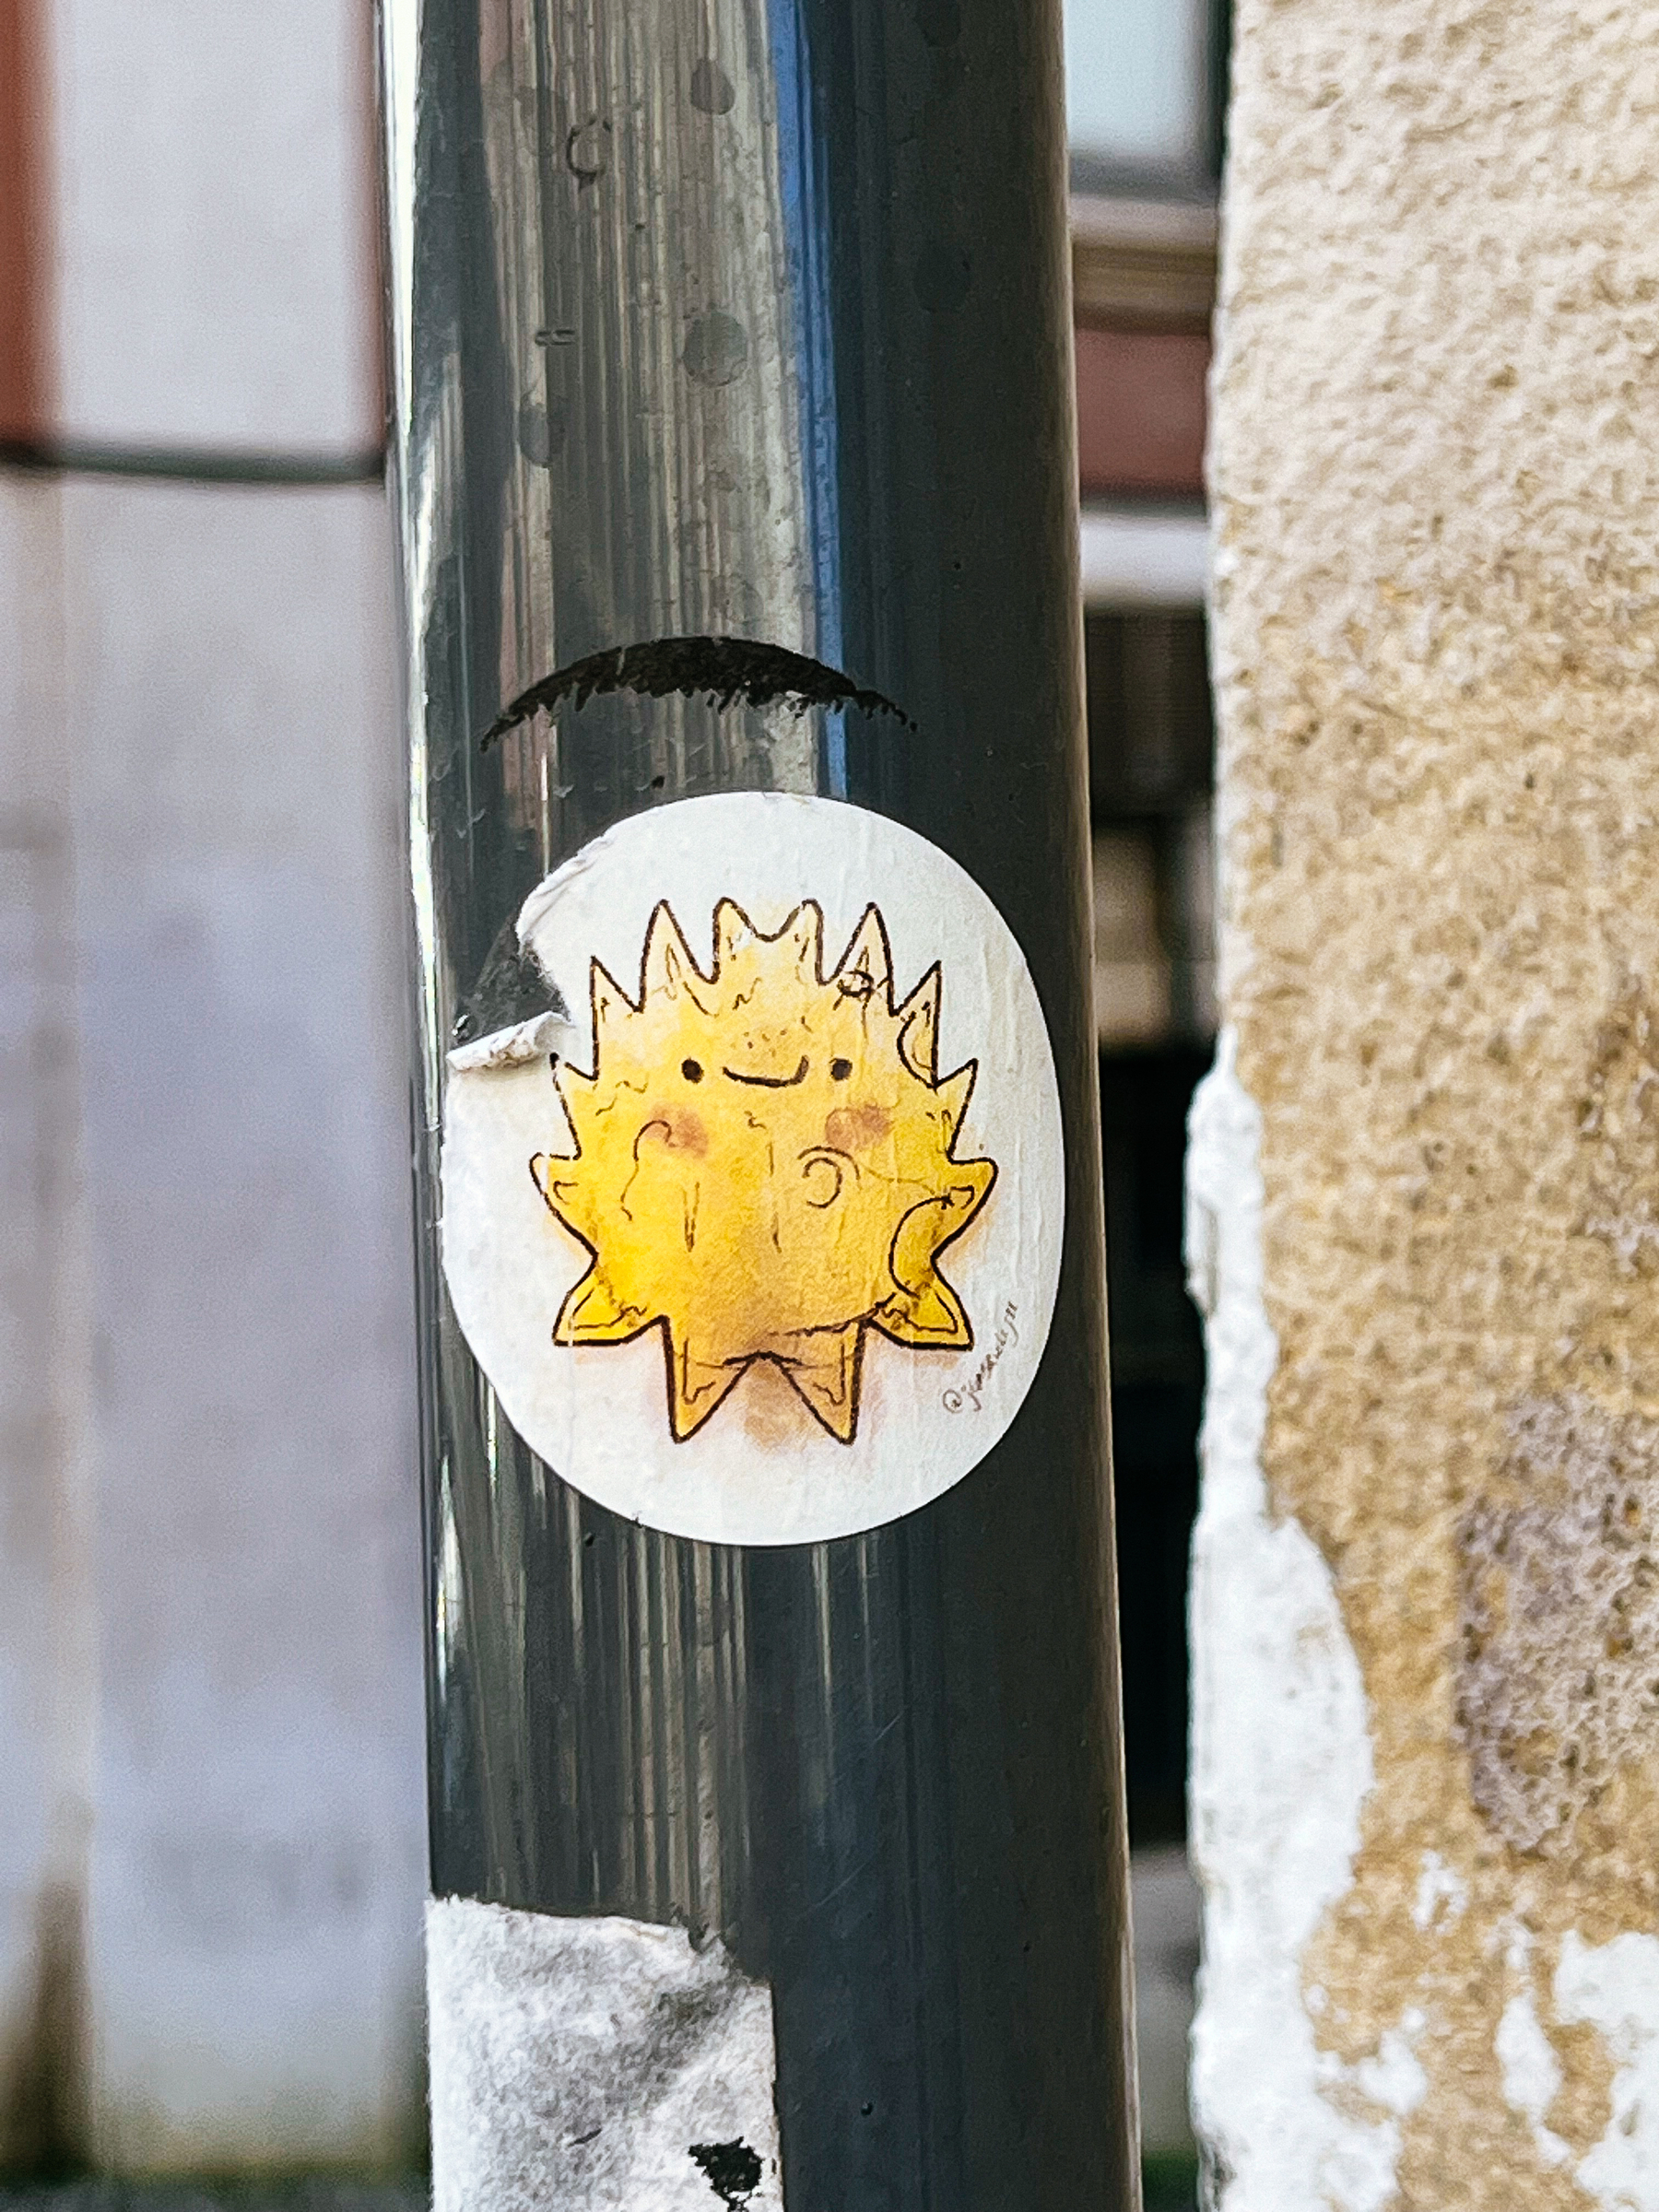 A weathered sticker depicting a smiling sun is affixed to a metal pole, flanked by rough wall textures.